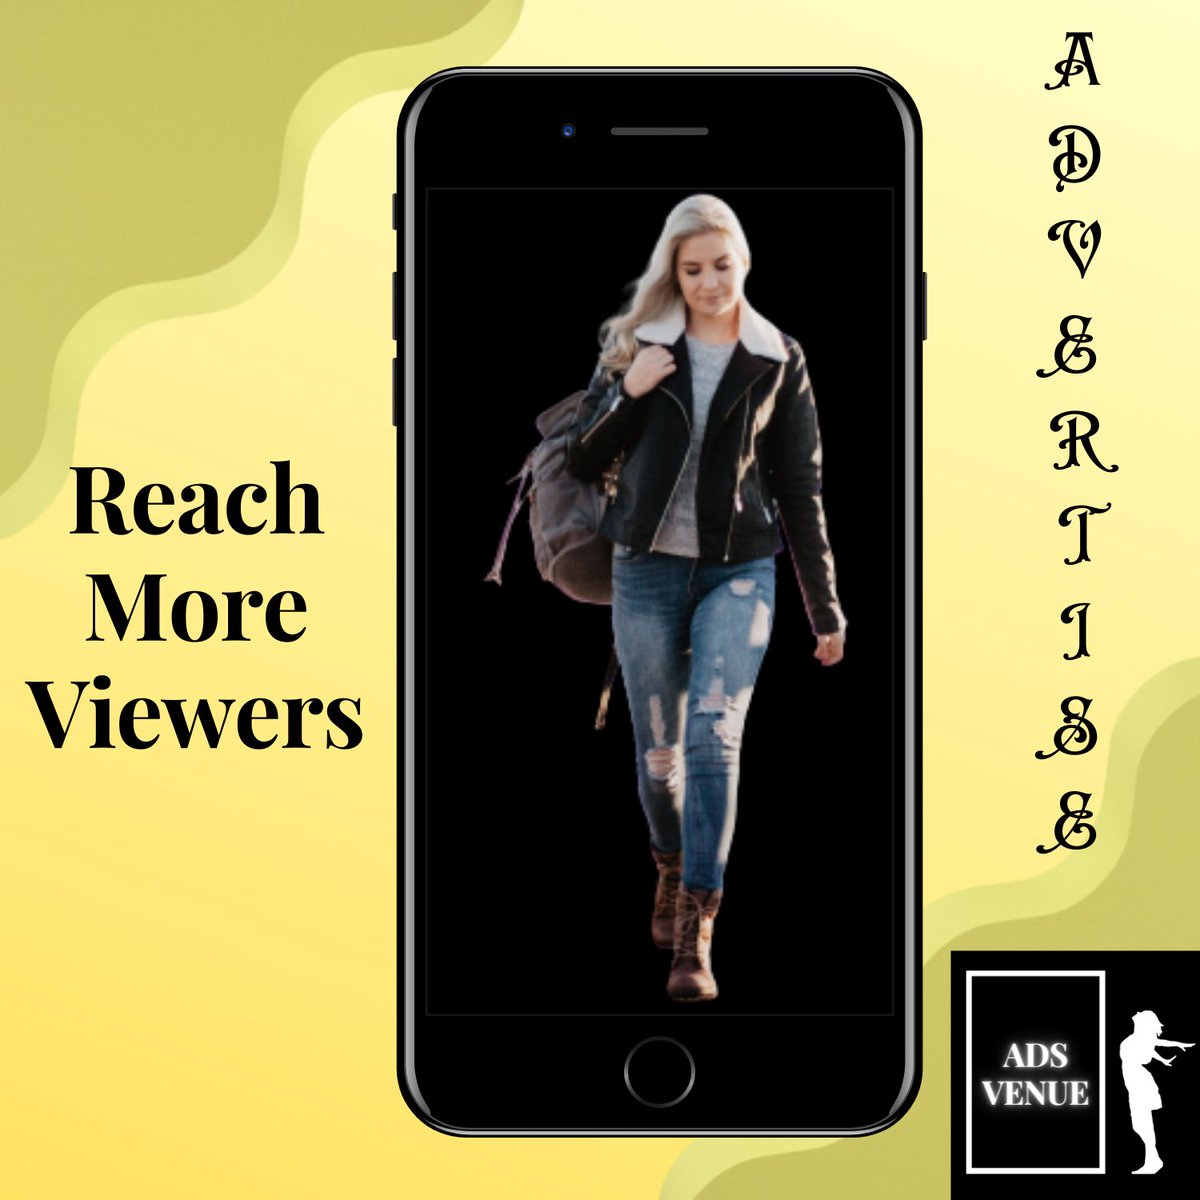 Make your ad distinguishable, effective and more performable   to reach more viewers. 
adsvenue.blogspot.com/p/how-to-creat…
#adsvenue 
#ad #Ads #advertise #advertisement #advertising #promotion #advertisingtips #promotiontips 
#reach #moreviewers #viewers